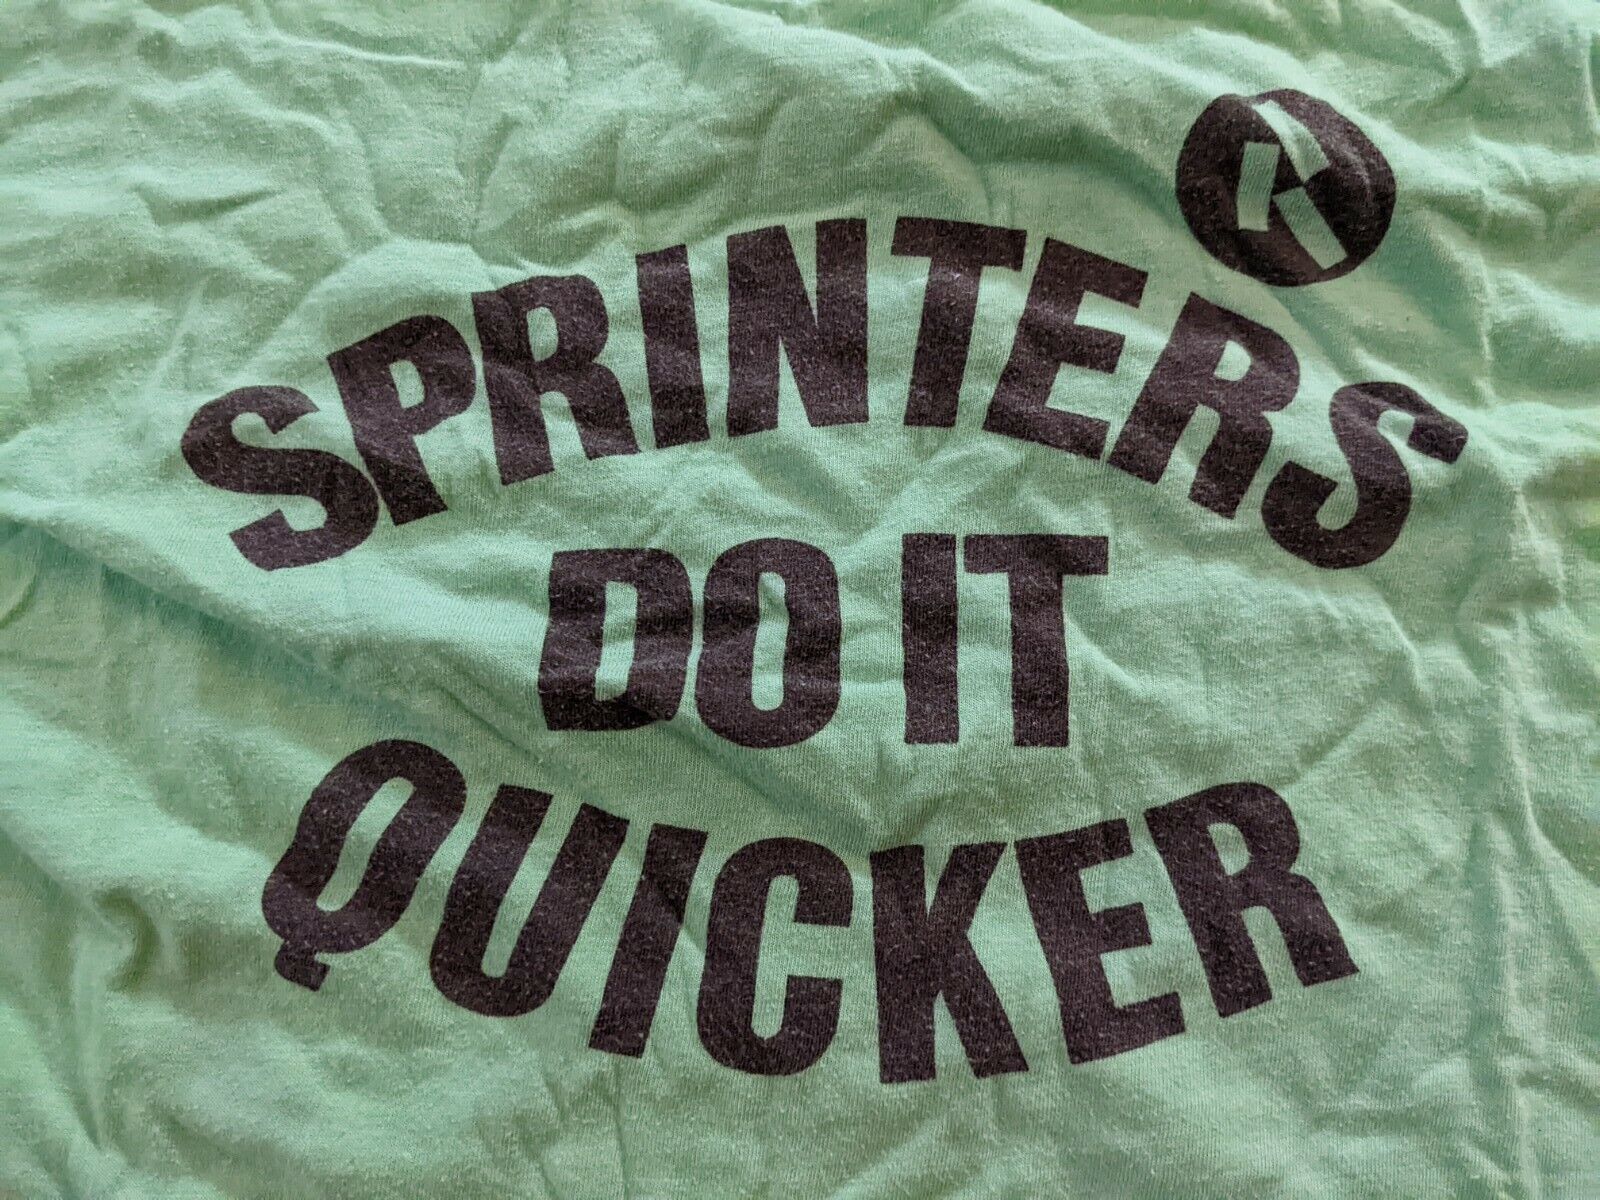 Vintage 1970s Russell Athletic Sprinters Do It Quicker T Shirt Green L USA - $108.89